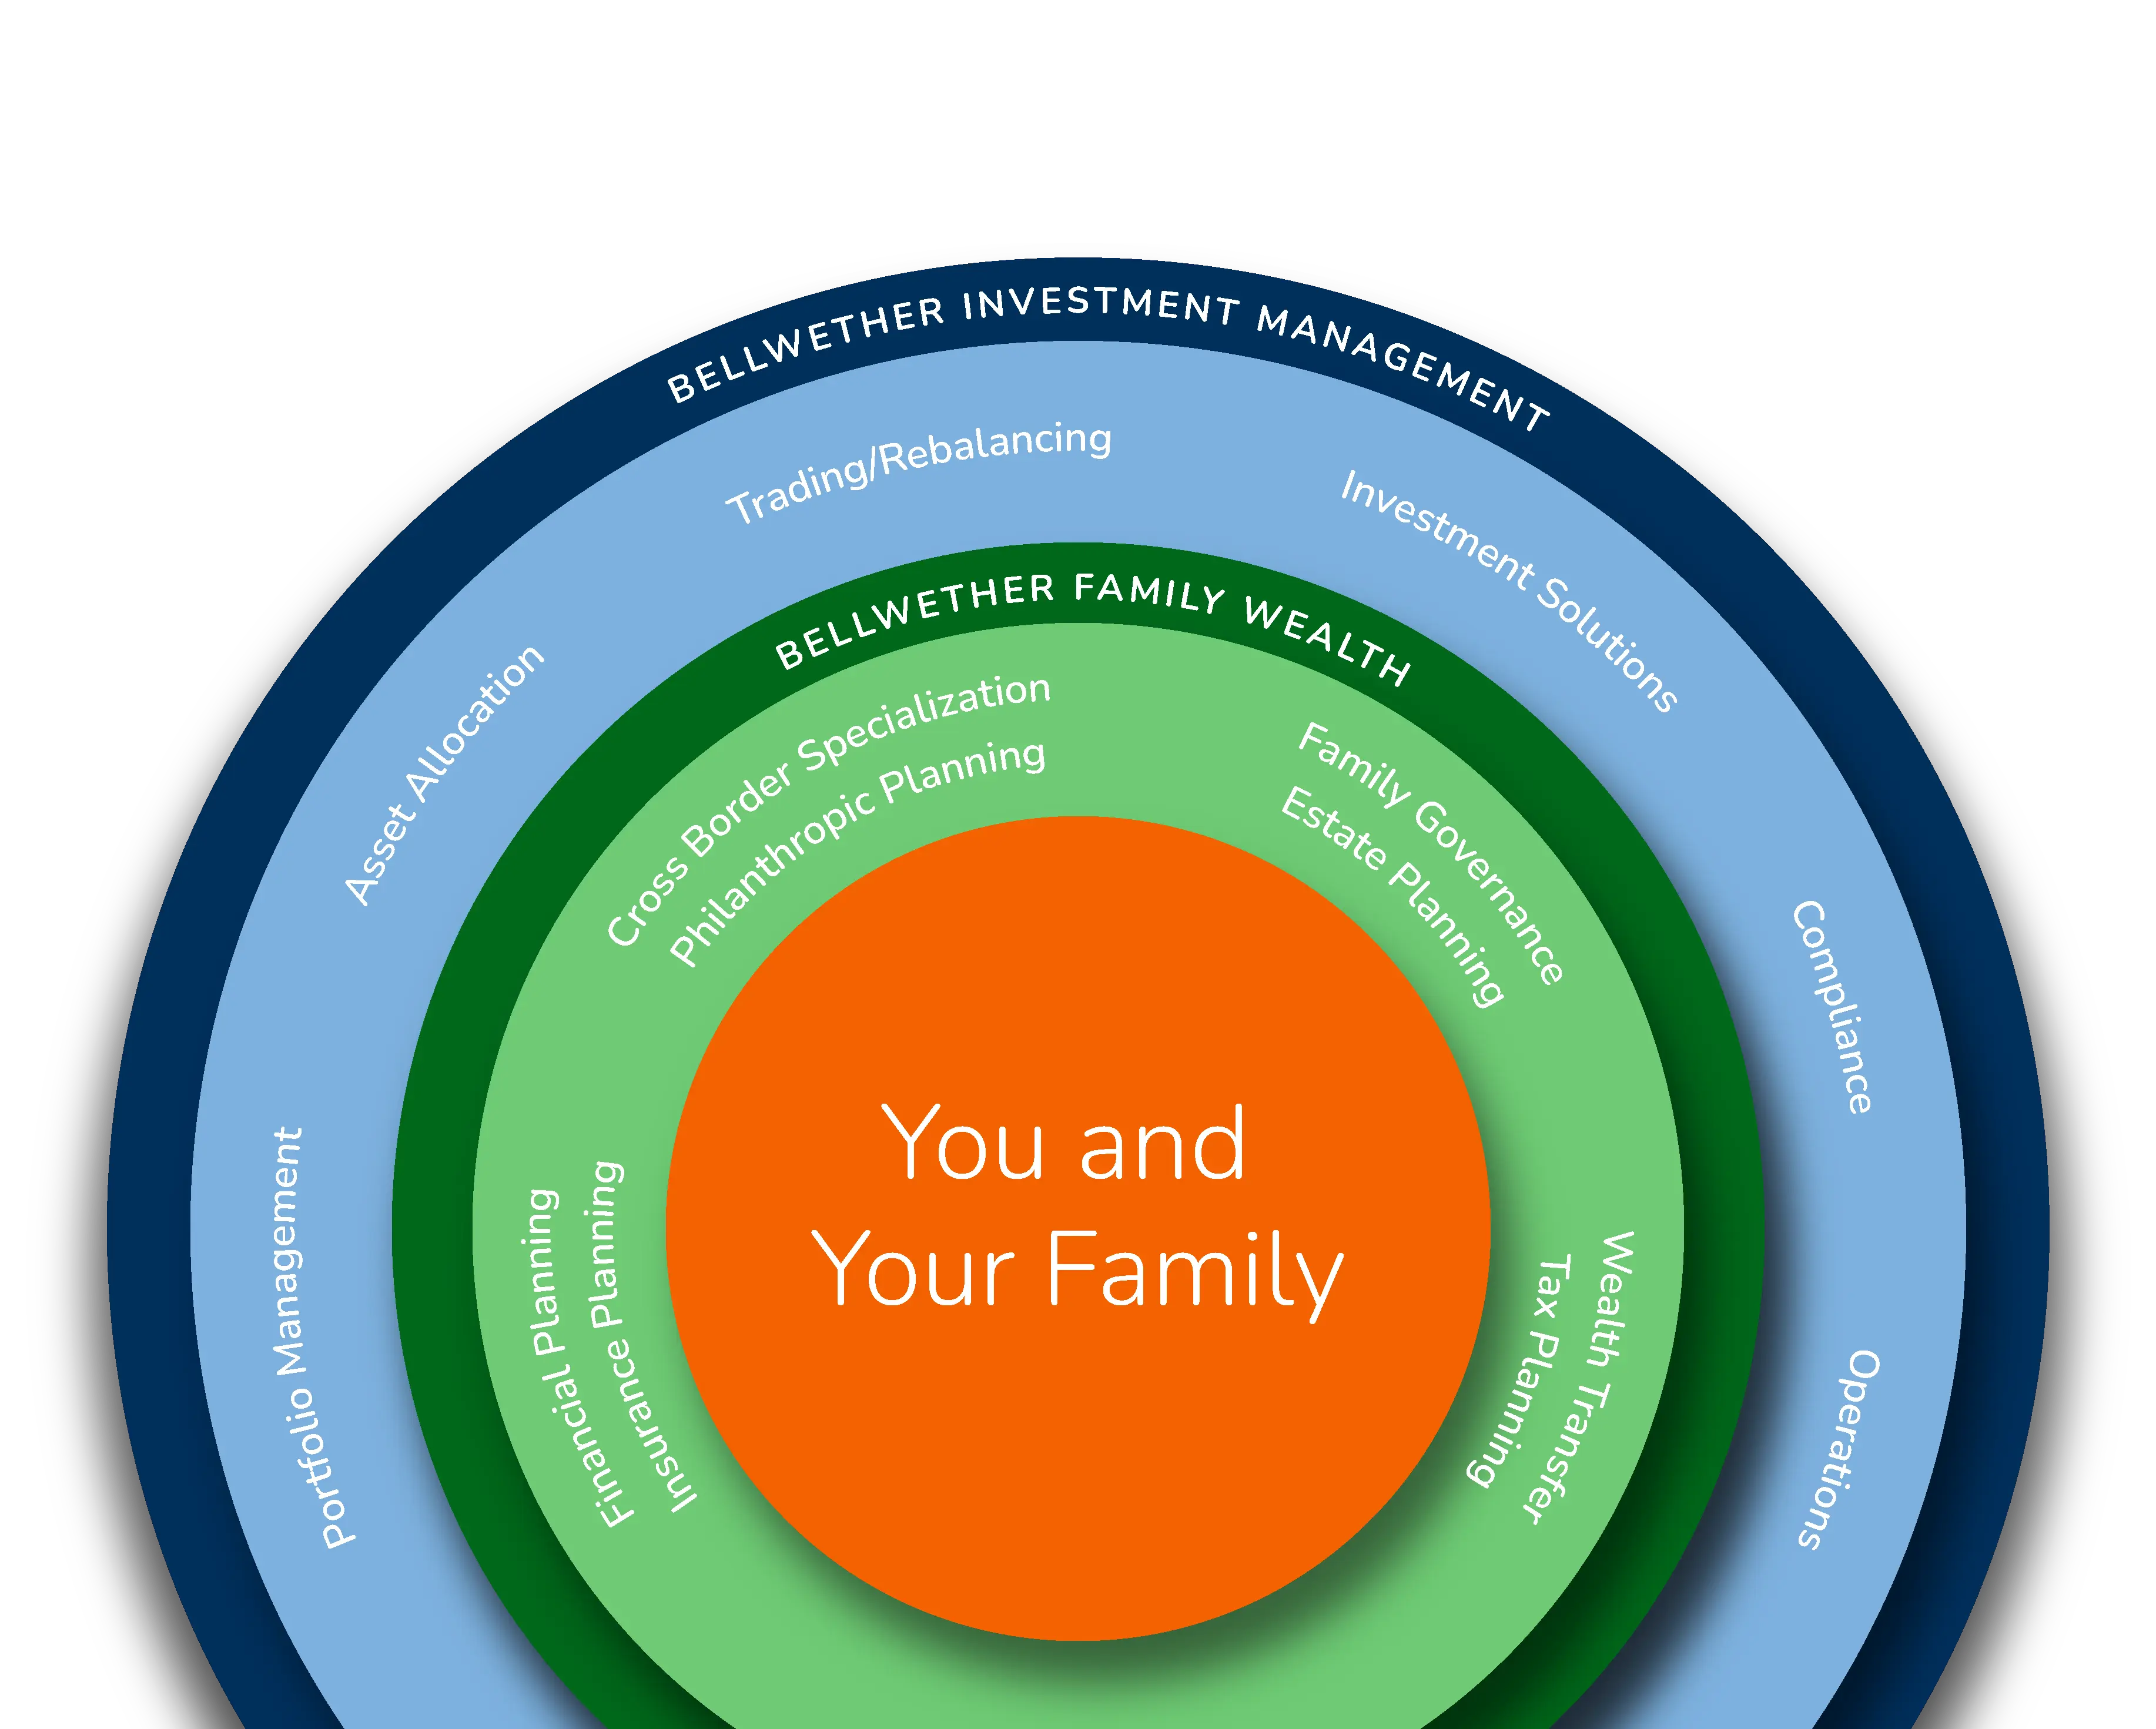 Circular graphic that shows the responsibilities of Bellwether Investment Management (mostly portfolio related) and Bellwether Family Wealth (which includes relationship management and client facing services)